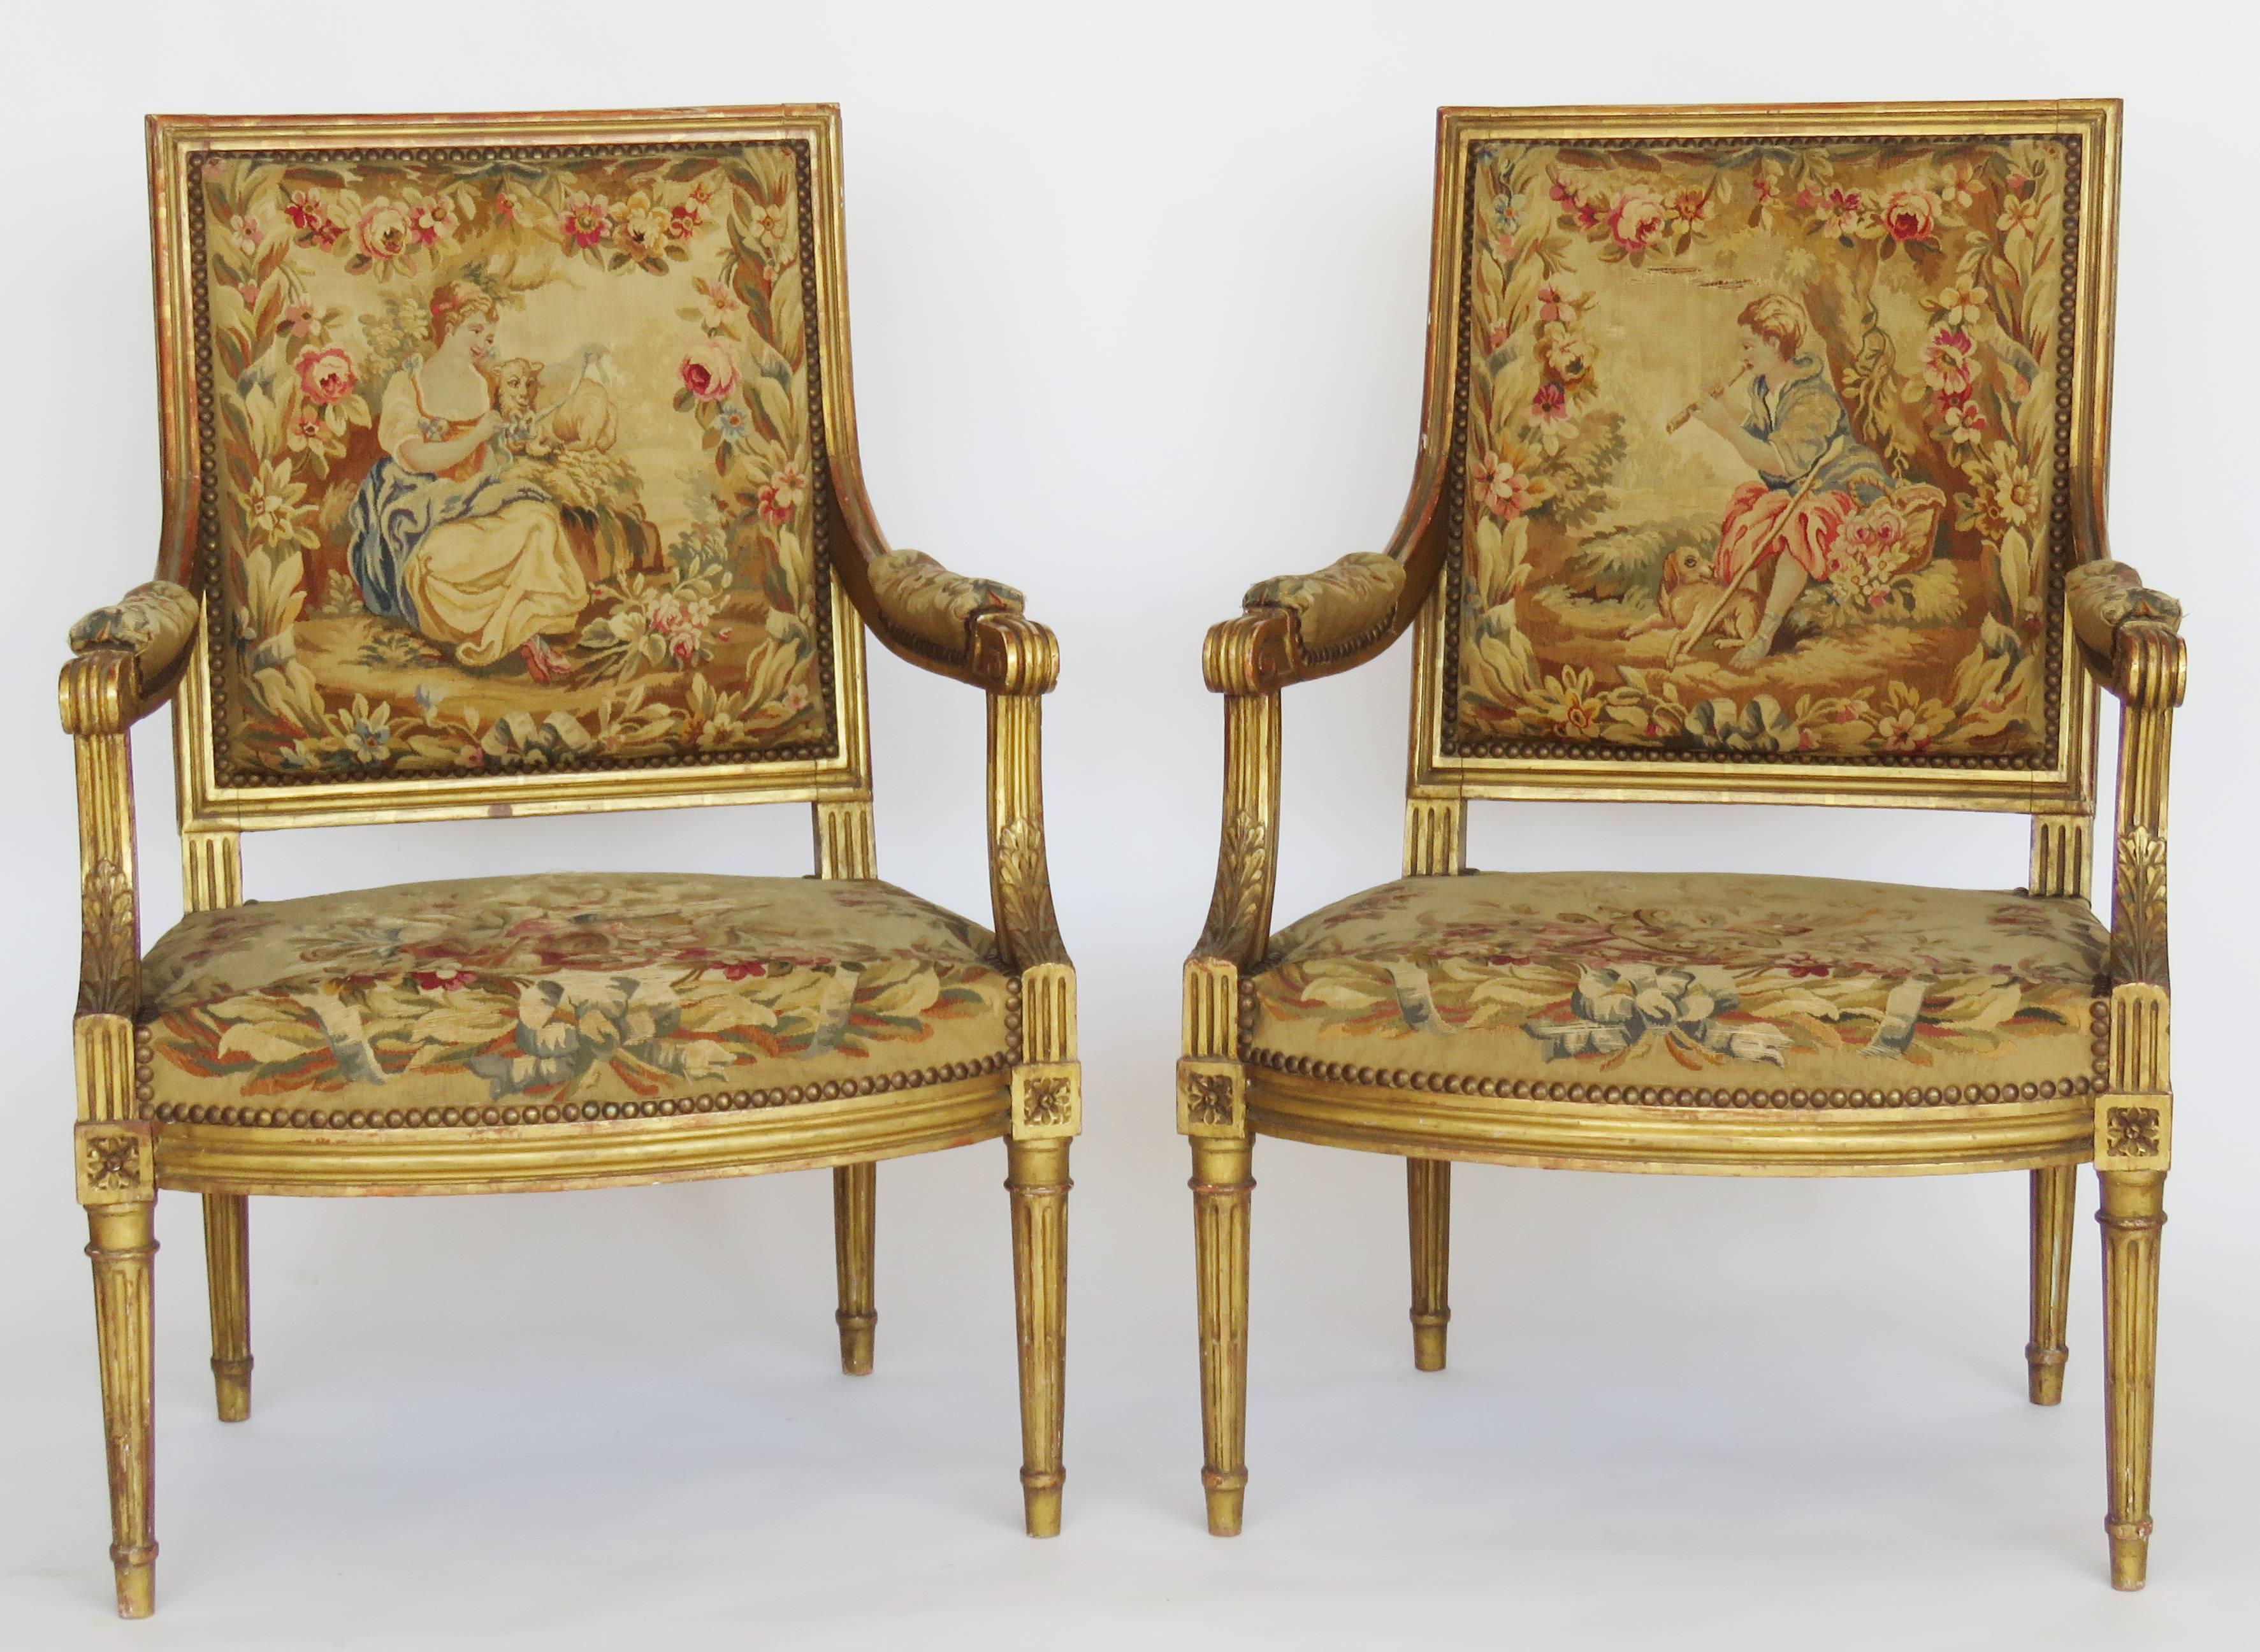 Giltwood Louis XVI style three piece parlour set comprises canapé and pair armchairs, rectangular backrest over downcurving arms and shaped seat raised on fluted tapering legs, upholstered in fine Aubusson tapestry, the backs depicting floral